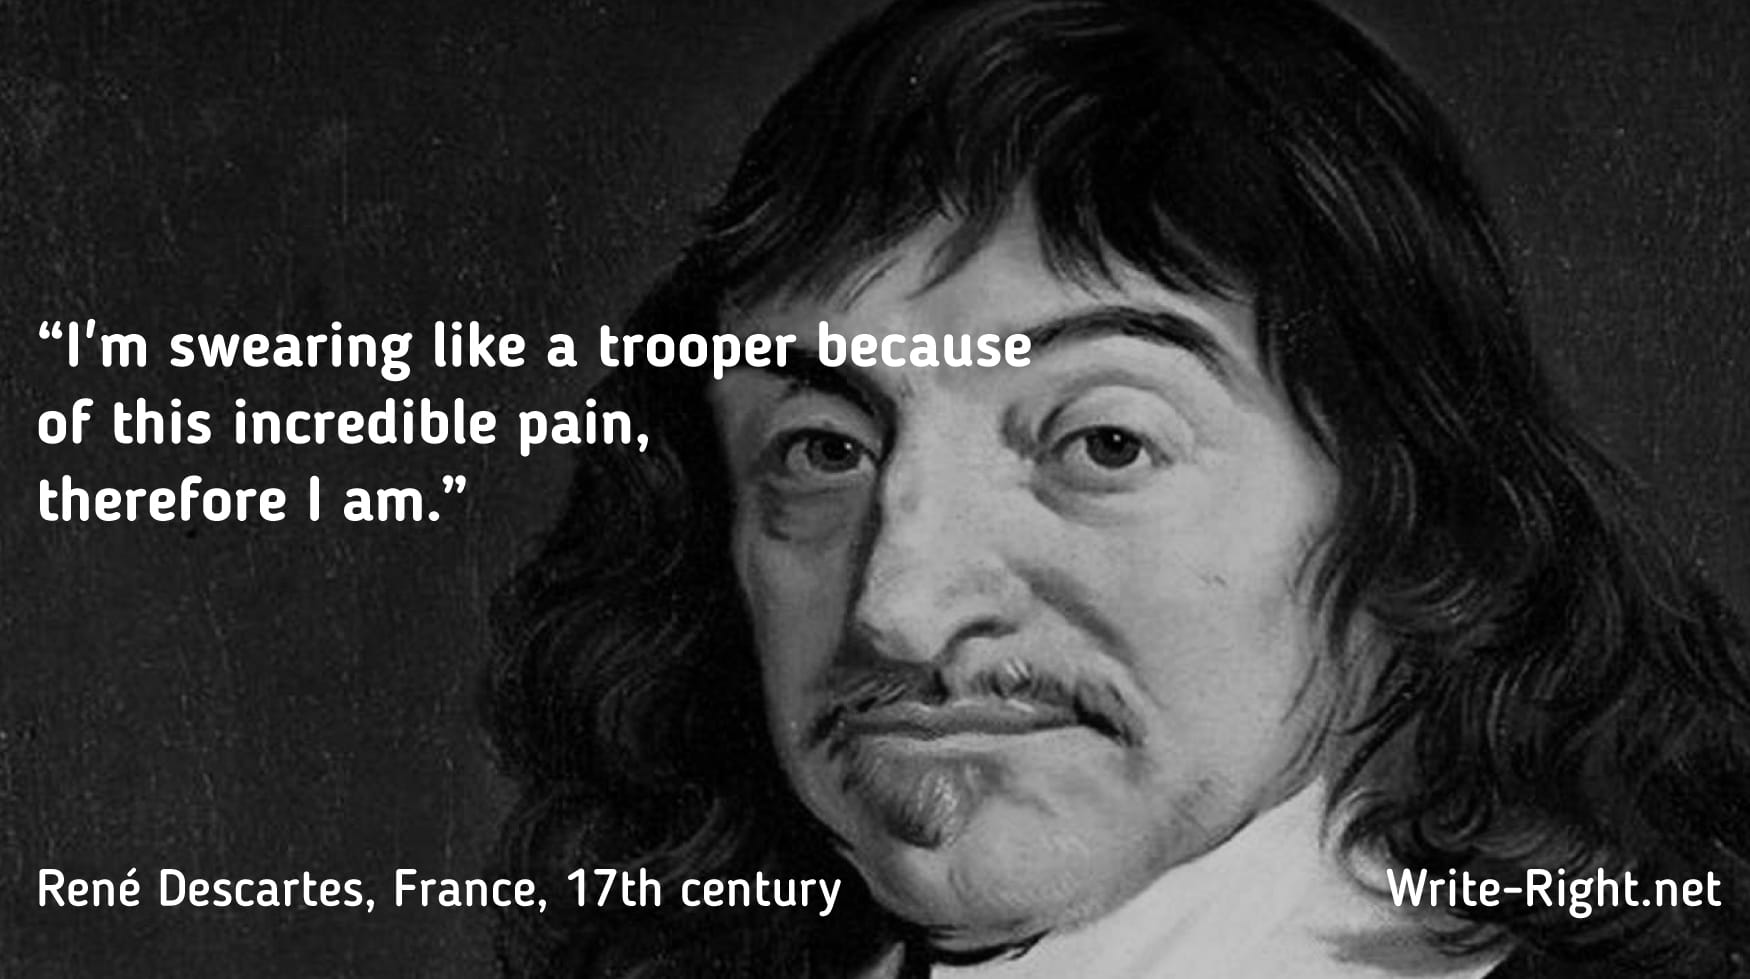 “I’m swearing like a trooper because of this incredible pain, therefore I am.” René Descartes, France, 17th century